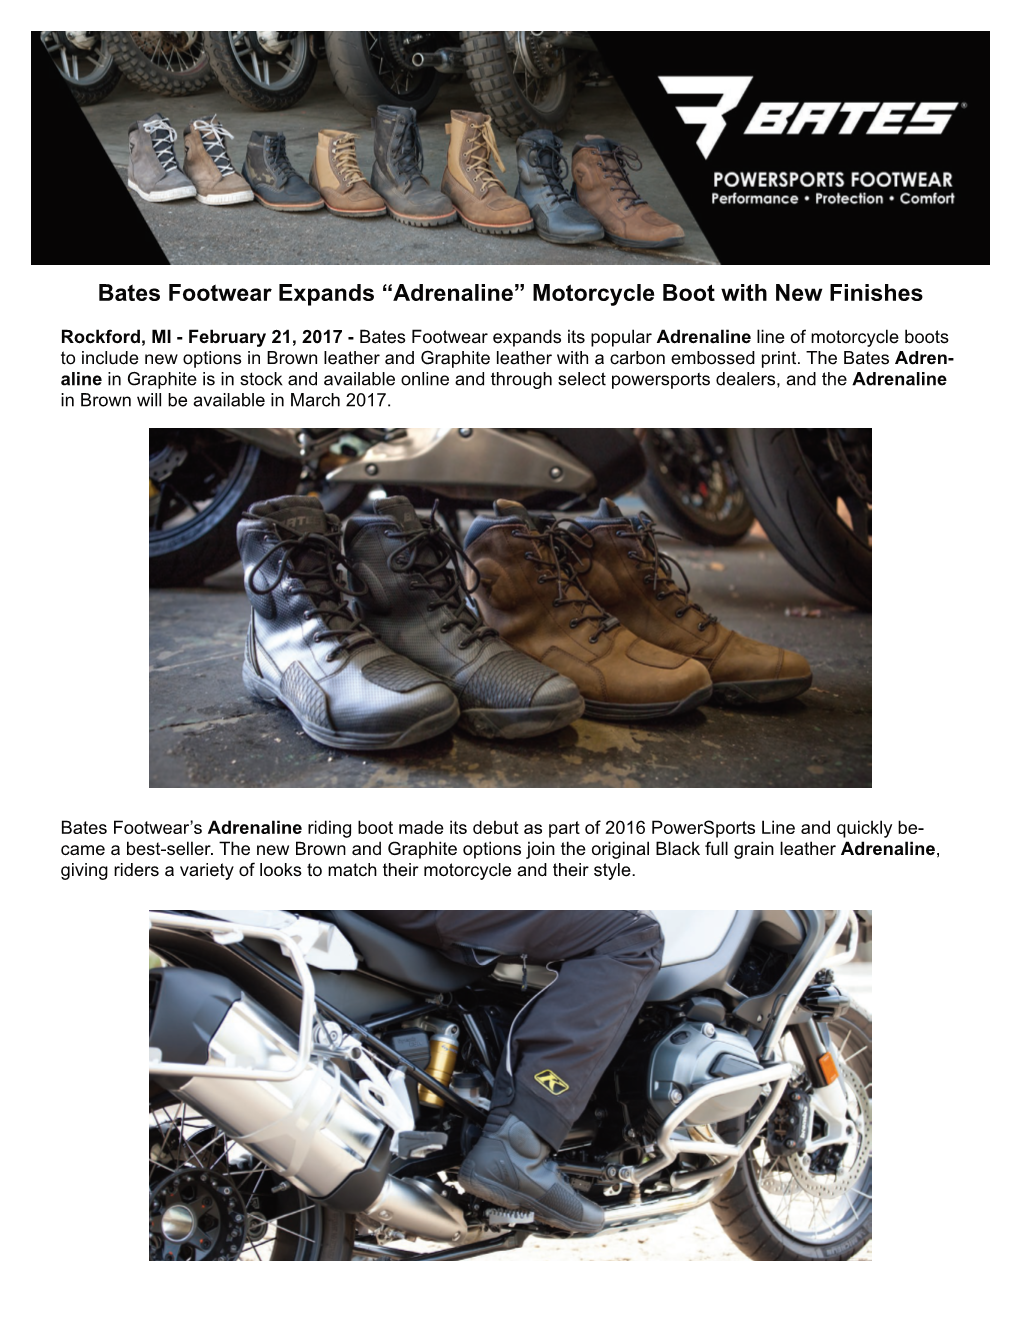 Bates Footwear Expands “Adrenaline” Motorcycle Boot with New Finishes